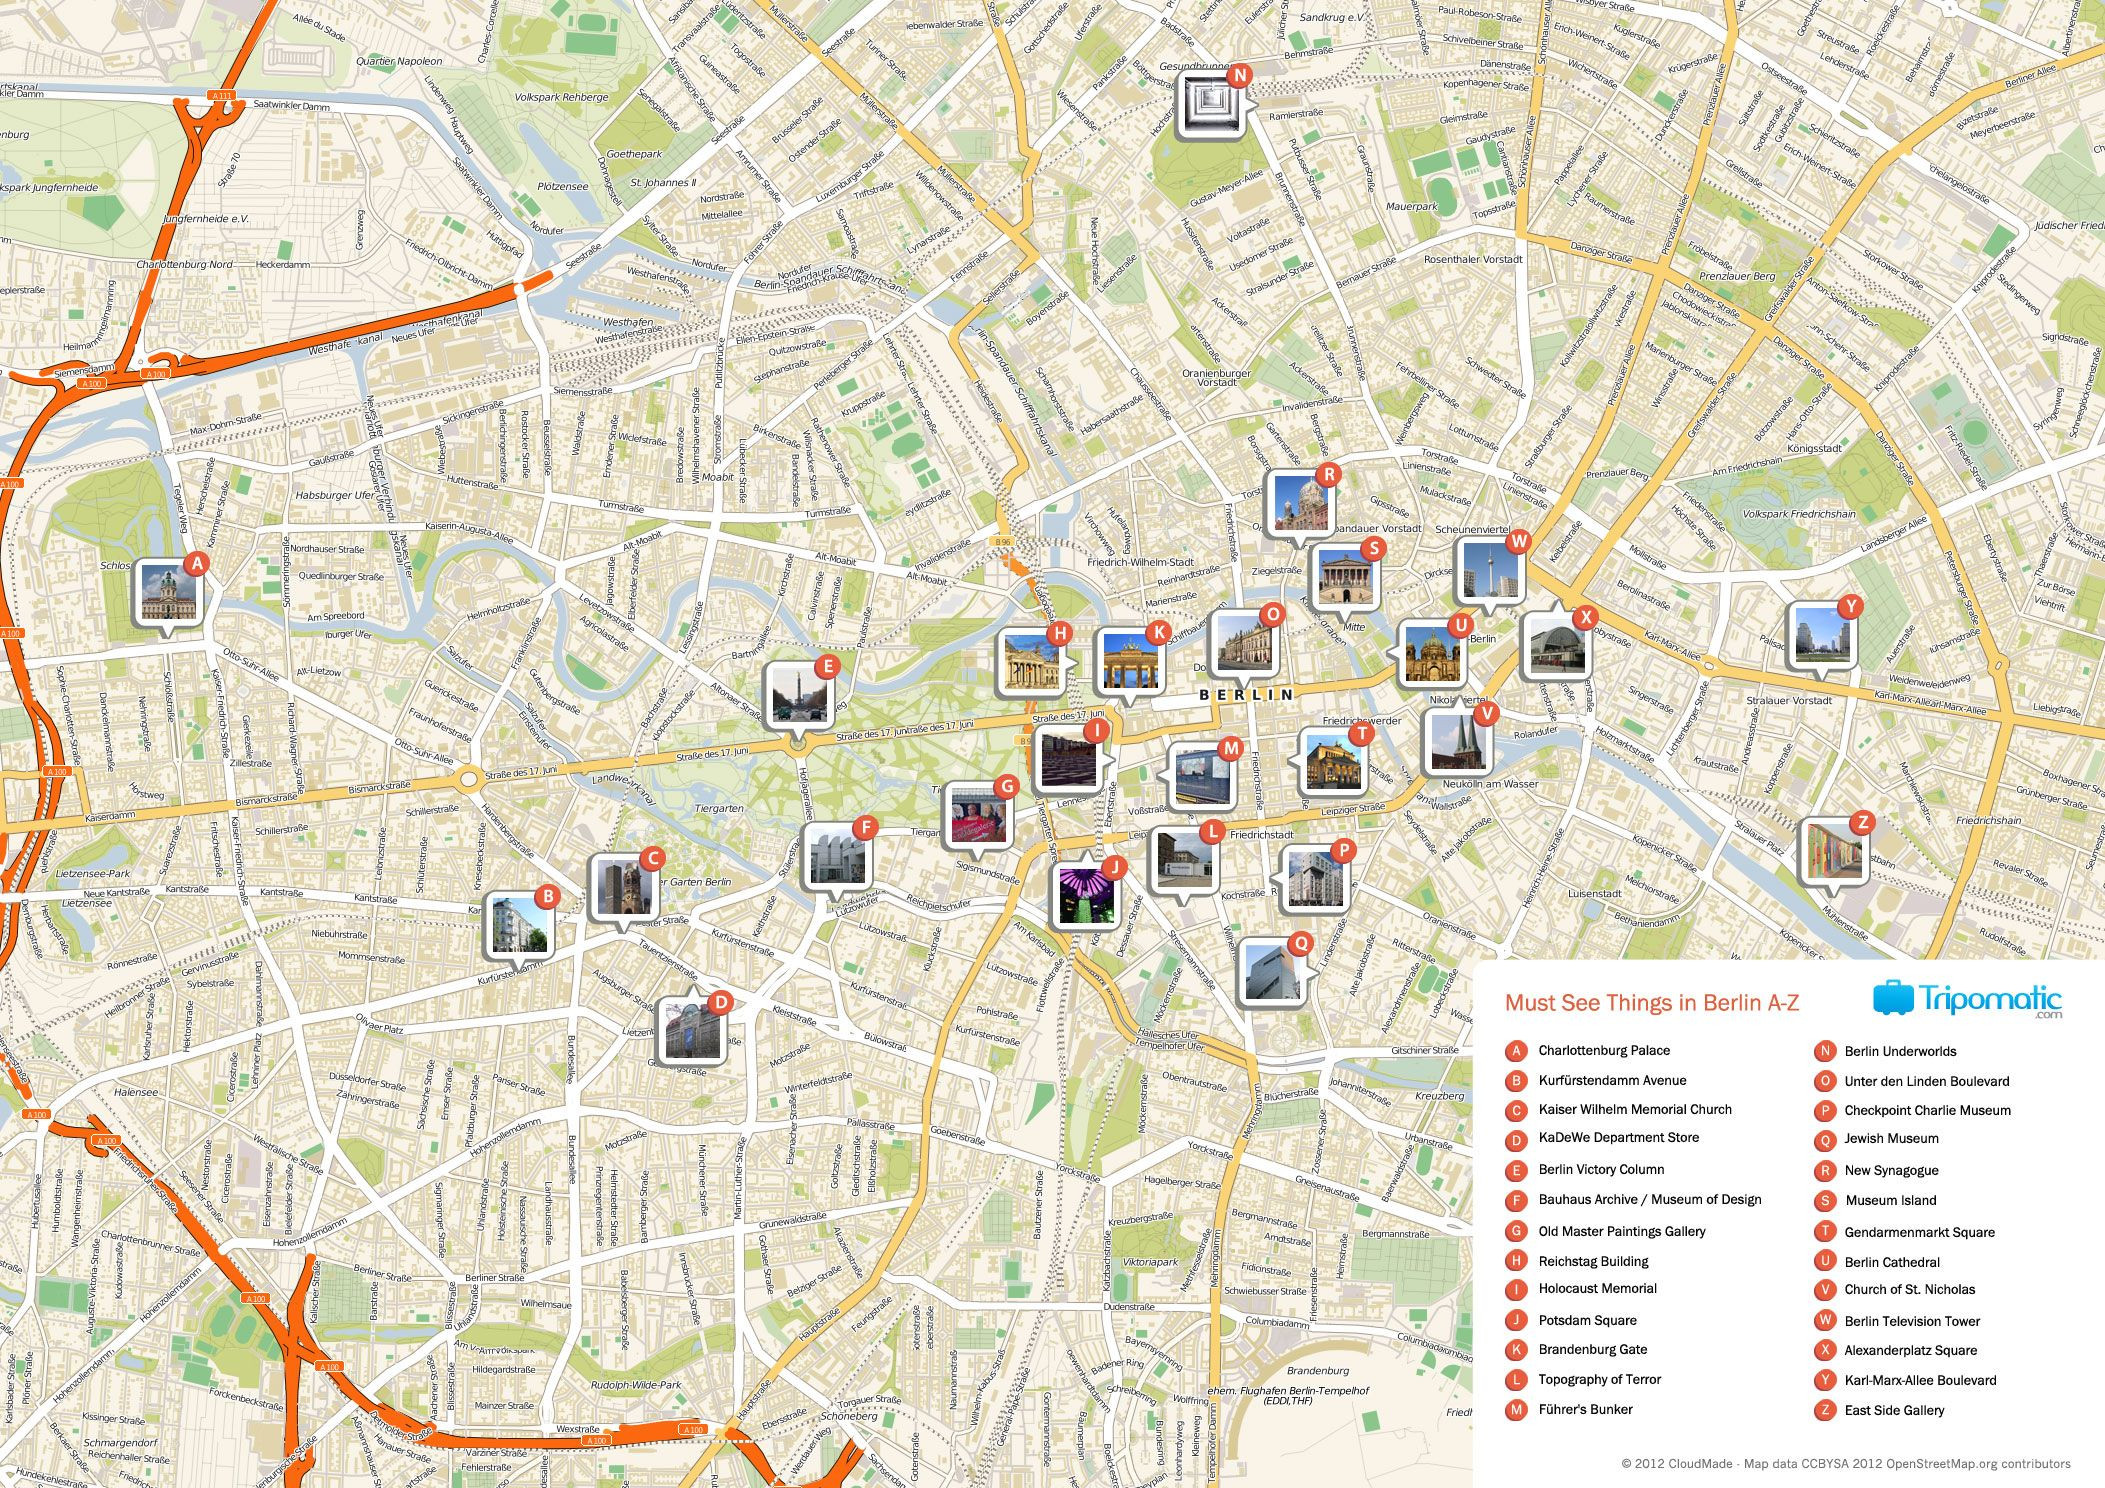 Printable Map Paris Beautiful Map Of Berlin Tourist Sights And Attractions From Tripomatic